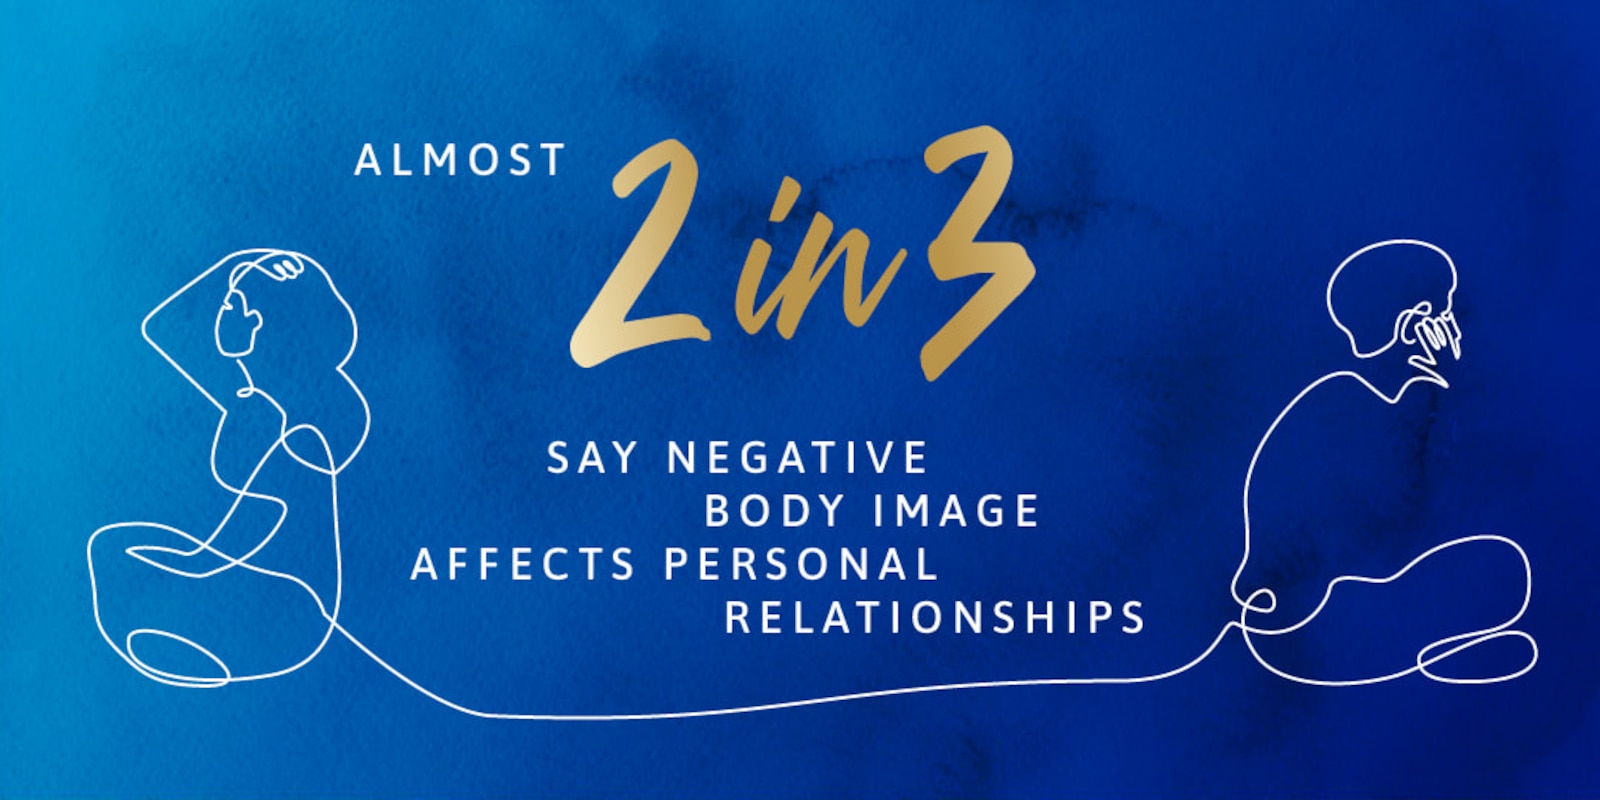 Almost 2 in 3 say negative body image affects personal relationships